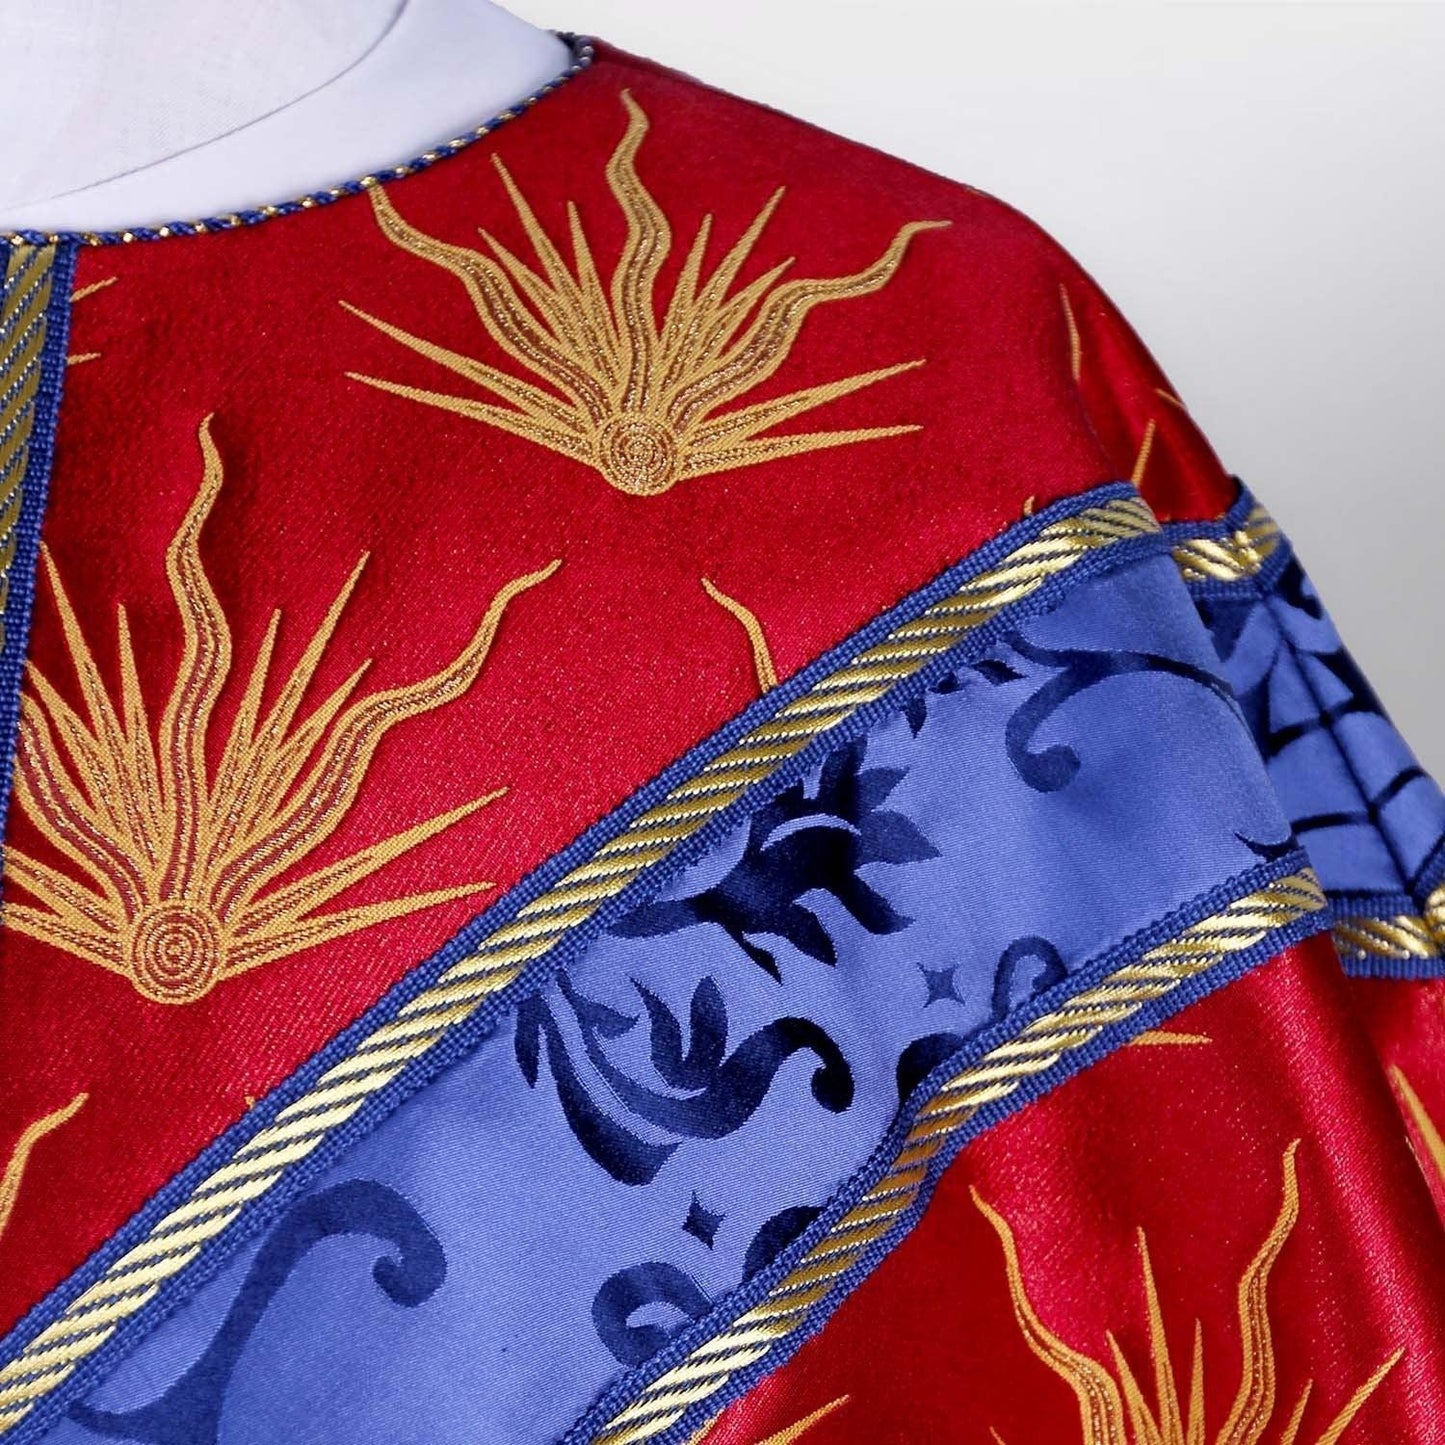 Full Gothic Chasuble in Red Pentecost Brocade with Blue Orphrey - Watts & Co. (international)